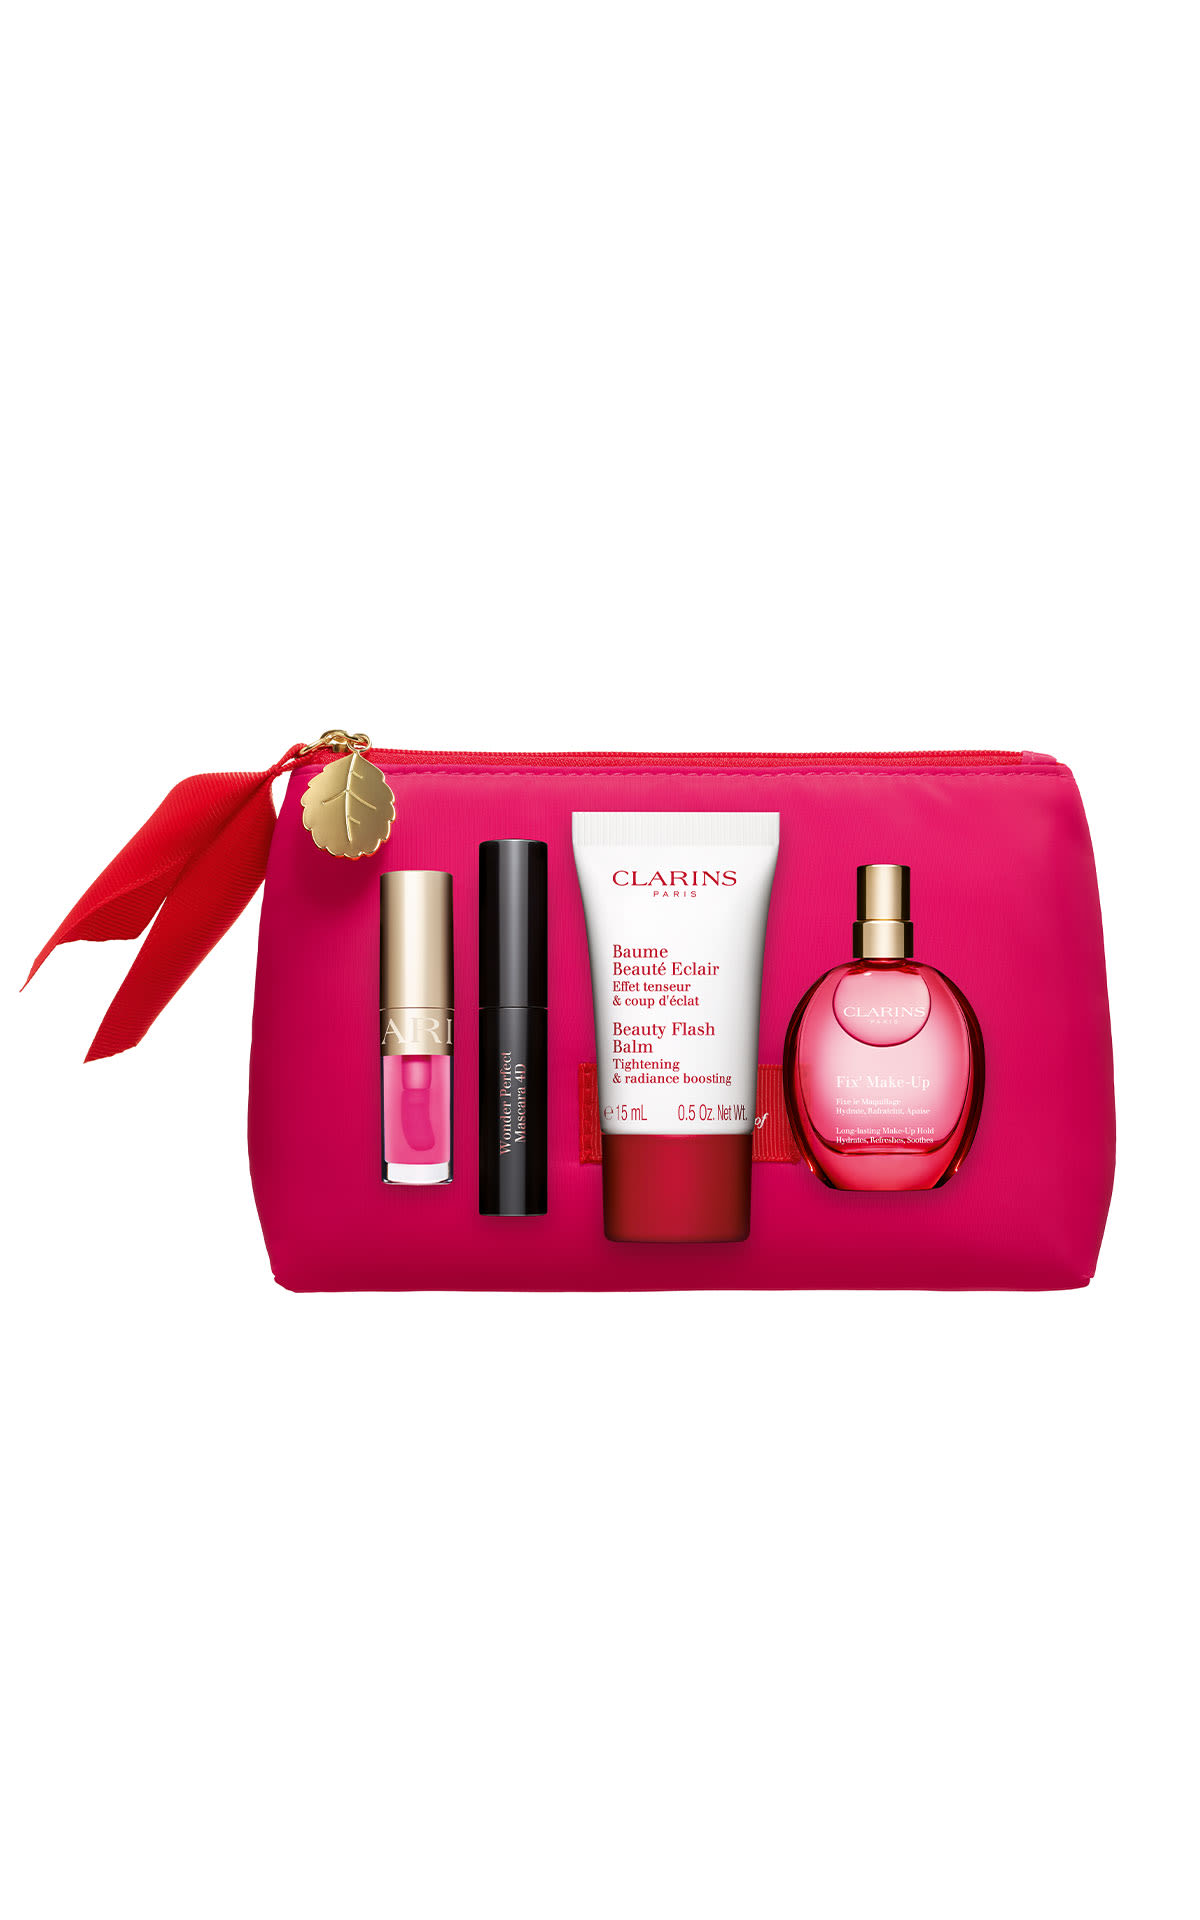 Clarins Make-up exclusive collection from Bicester Village